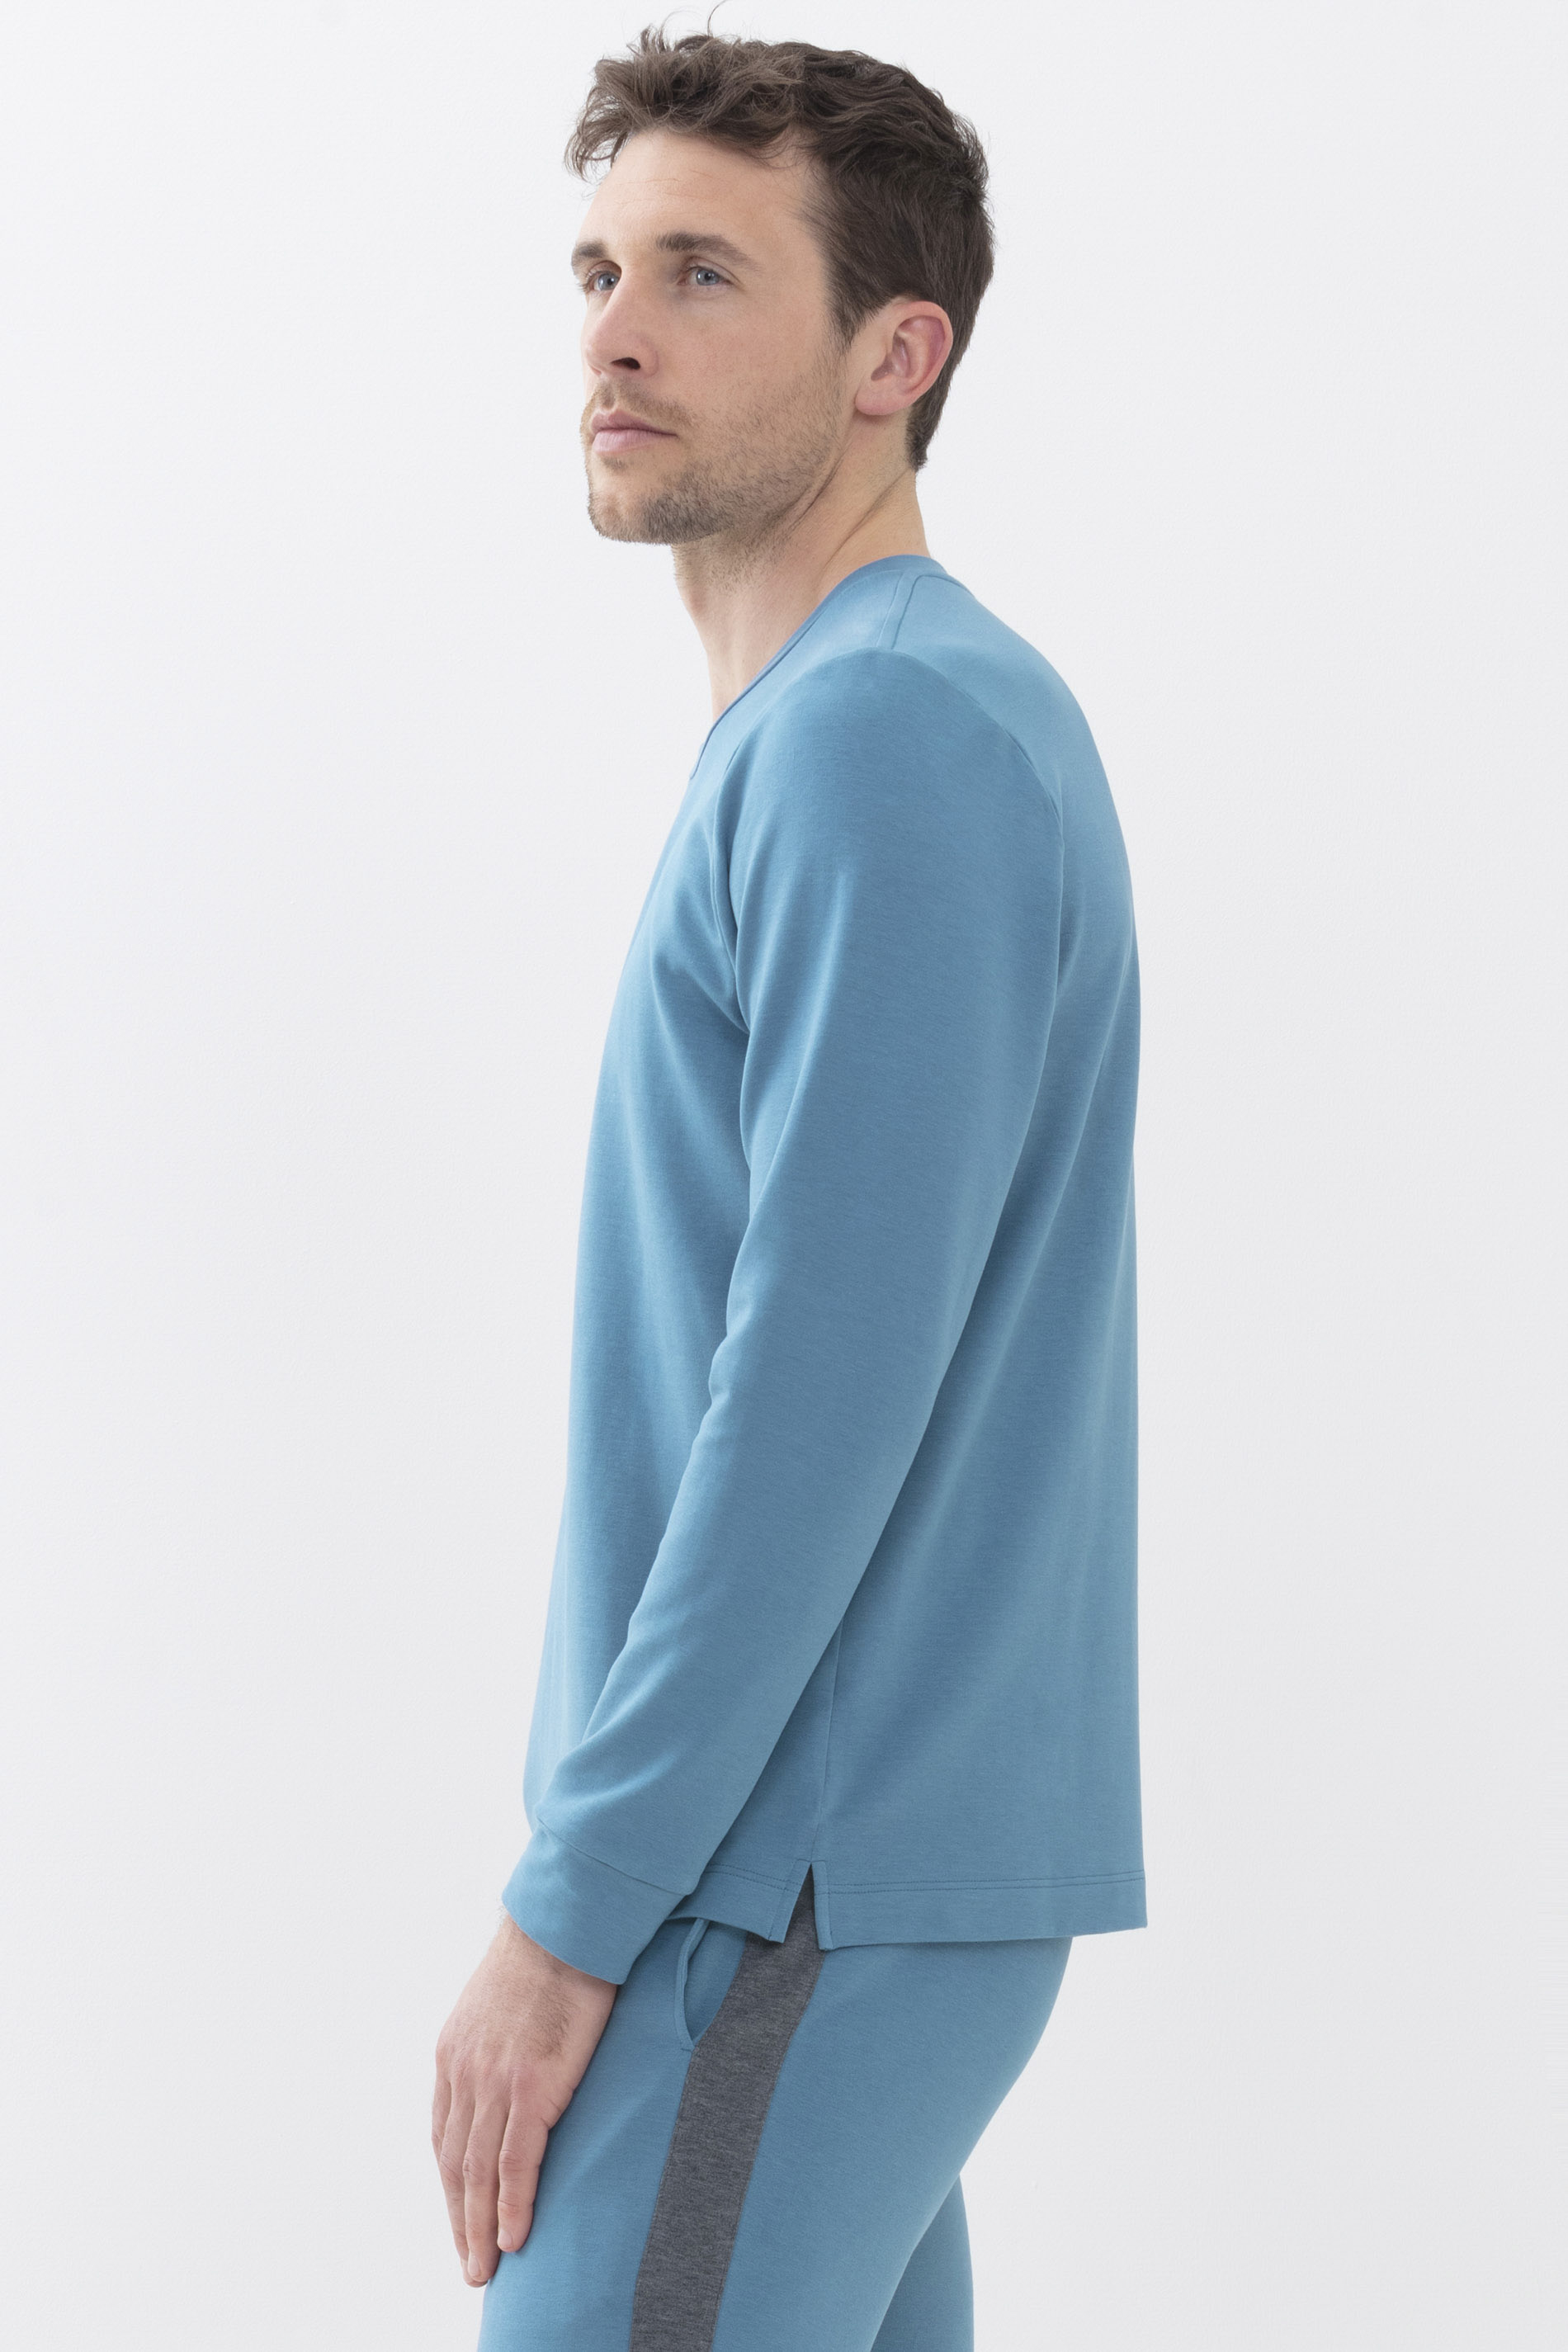 Long sleeves Yale Blue Serie Enjoy Colour Detail View 02 | mey®